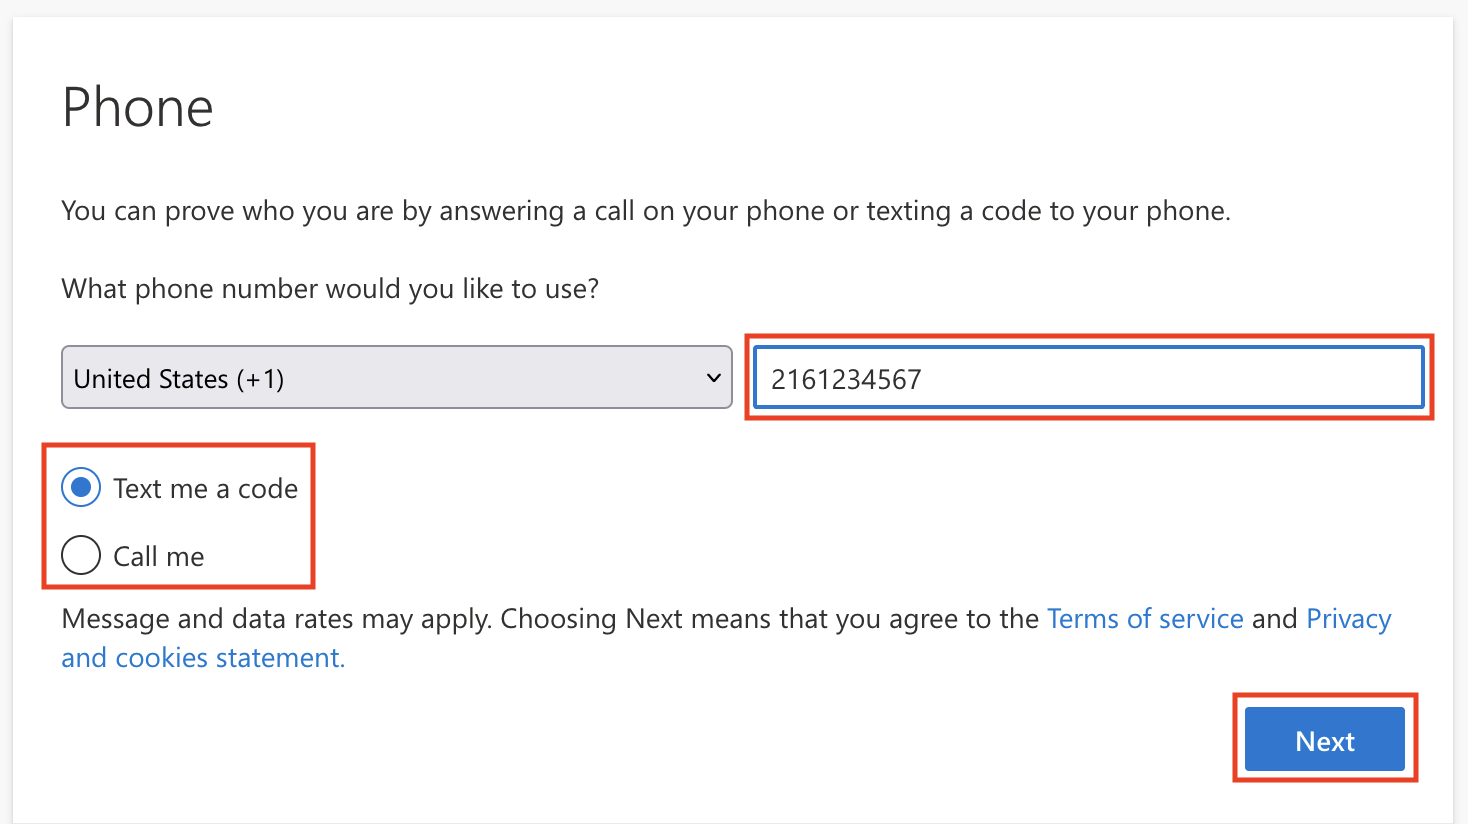 Screenshot of Microsoft MFA enrollment screen prompting the user for their phone number and choice of text message or phone call with the Next button emphasized